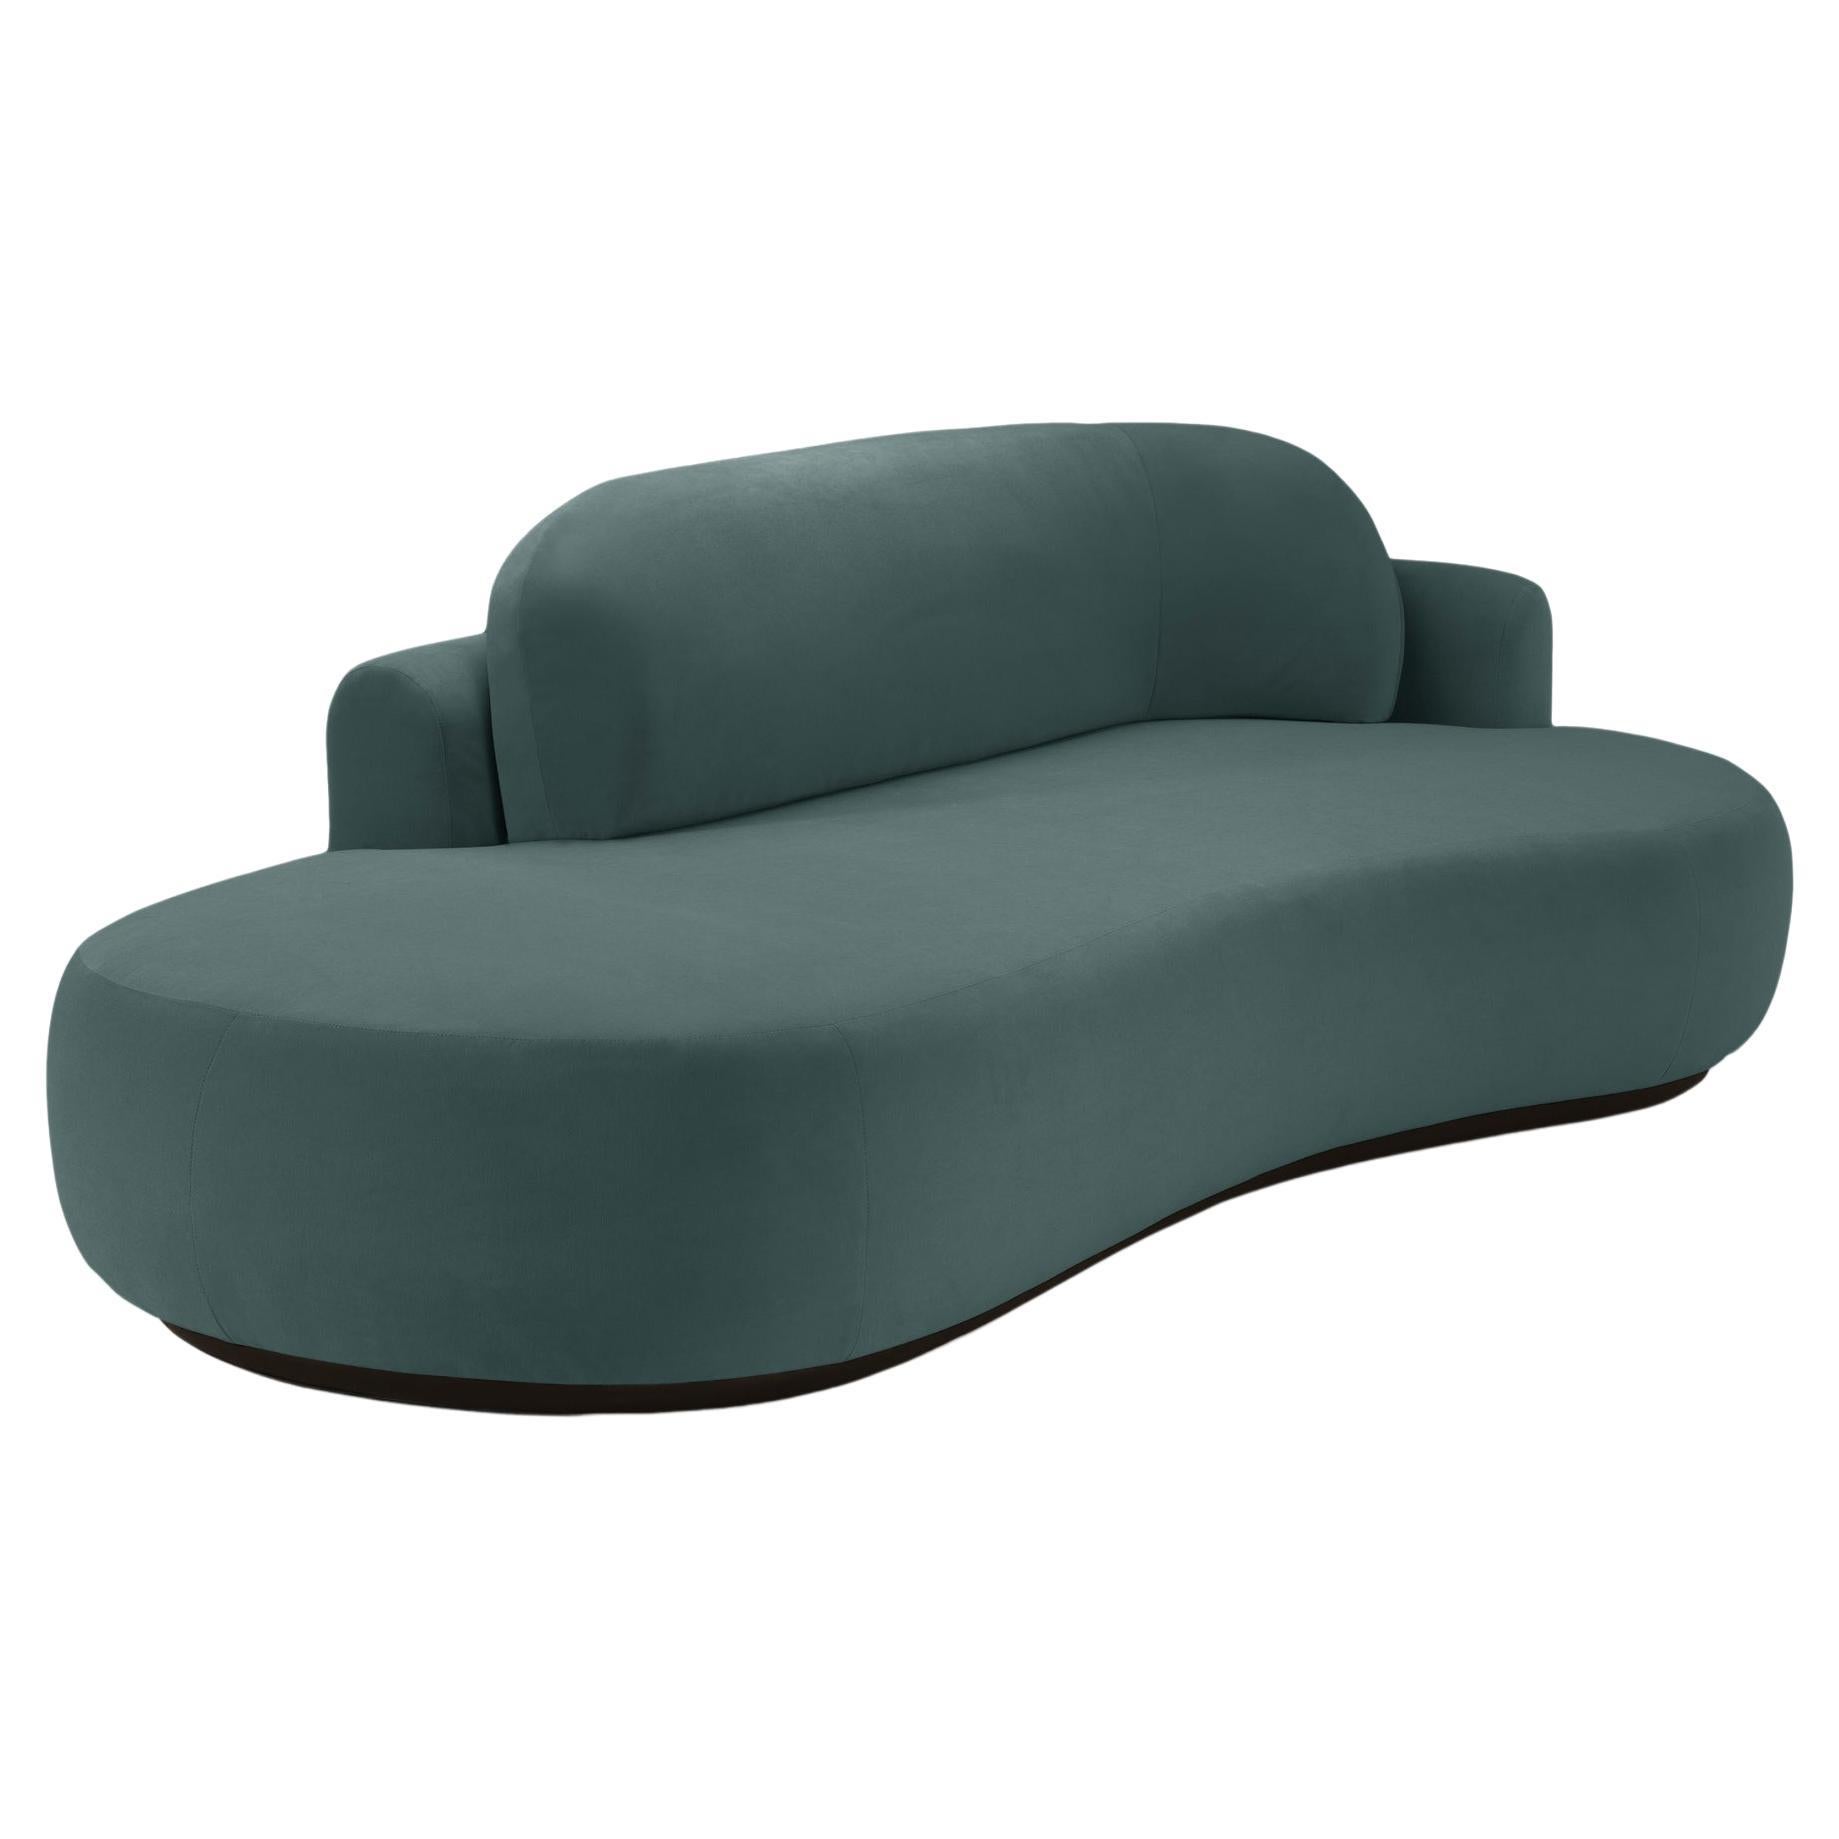 Naked Sofa Single with Beech Ash-056-5 and Teal For Sale